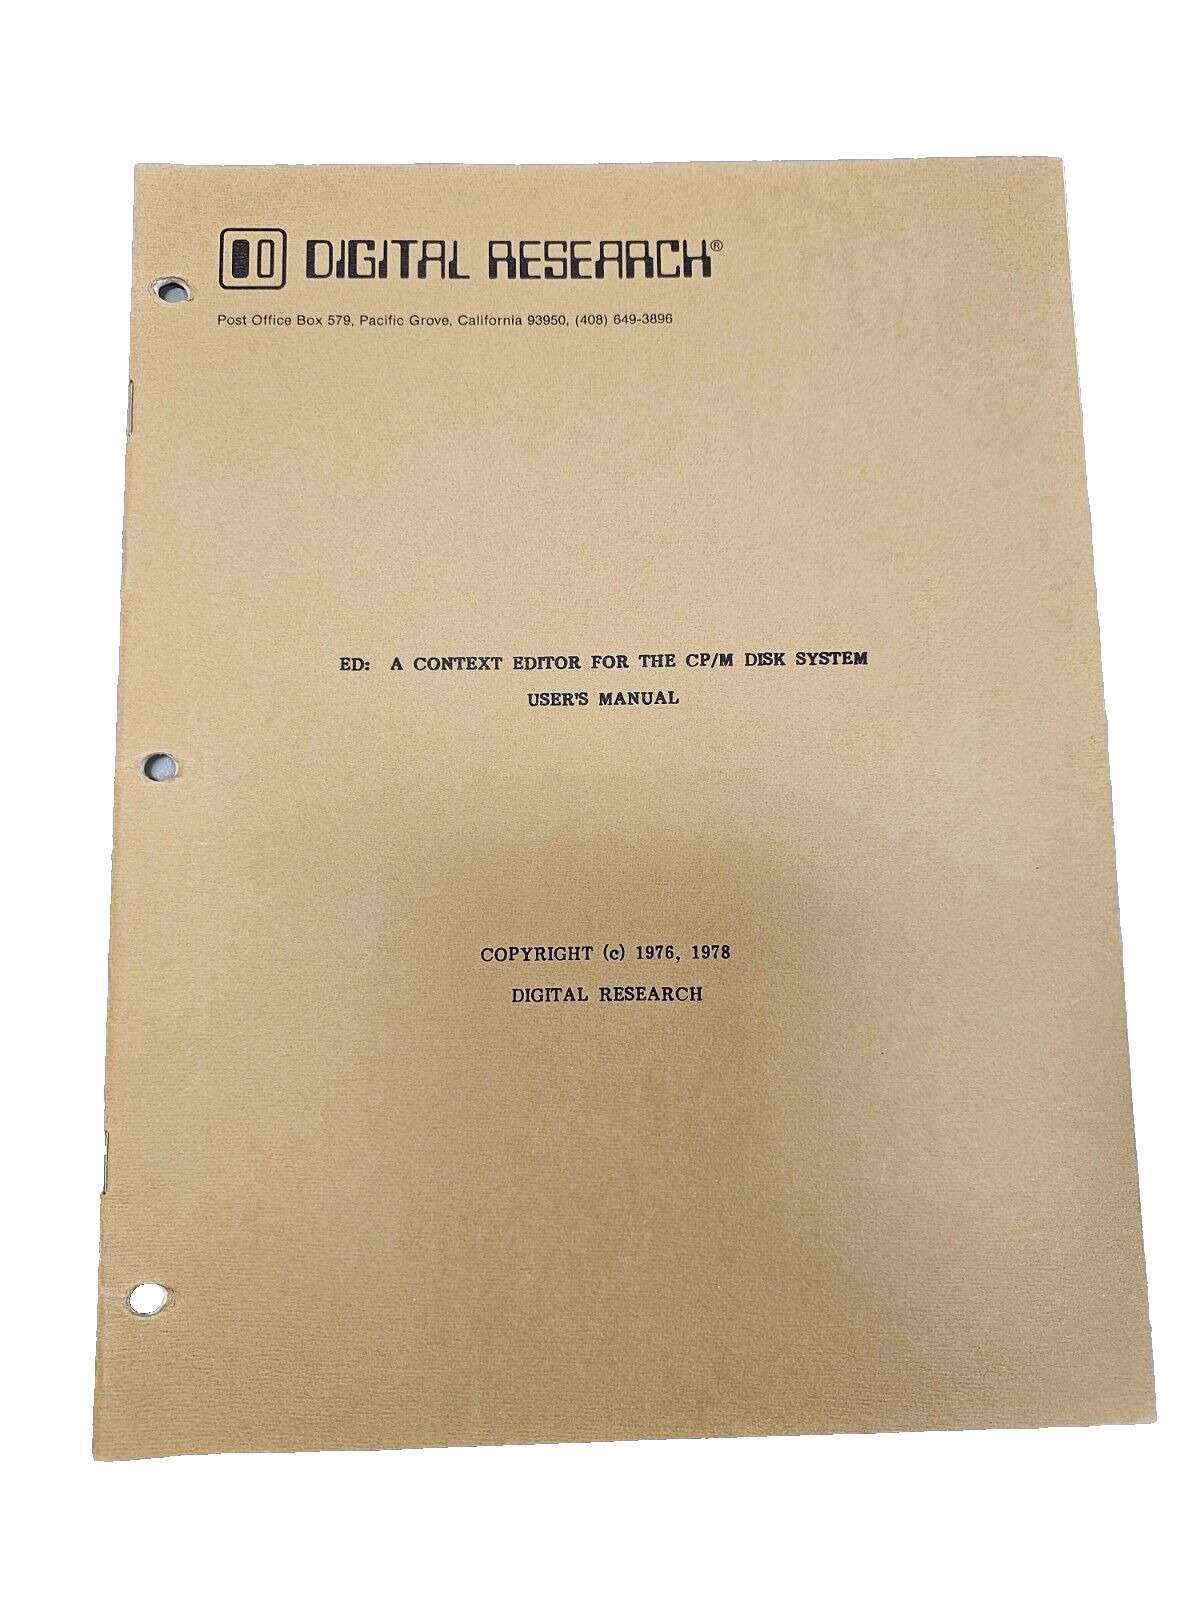 Vintage 1978 Digital Research Context Editor for CP/M Disk System User's Manual